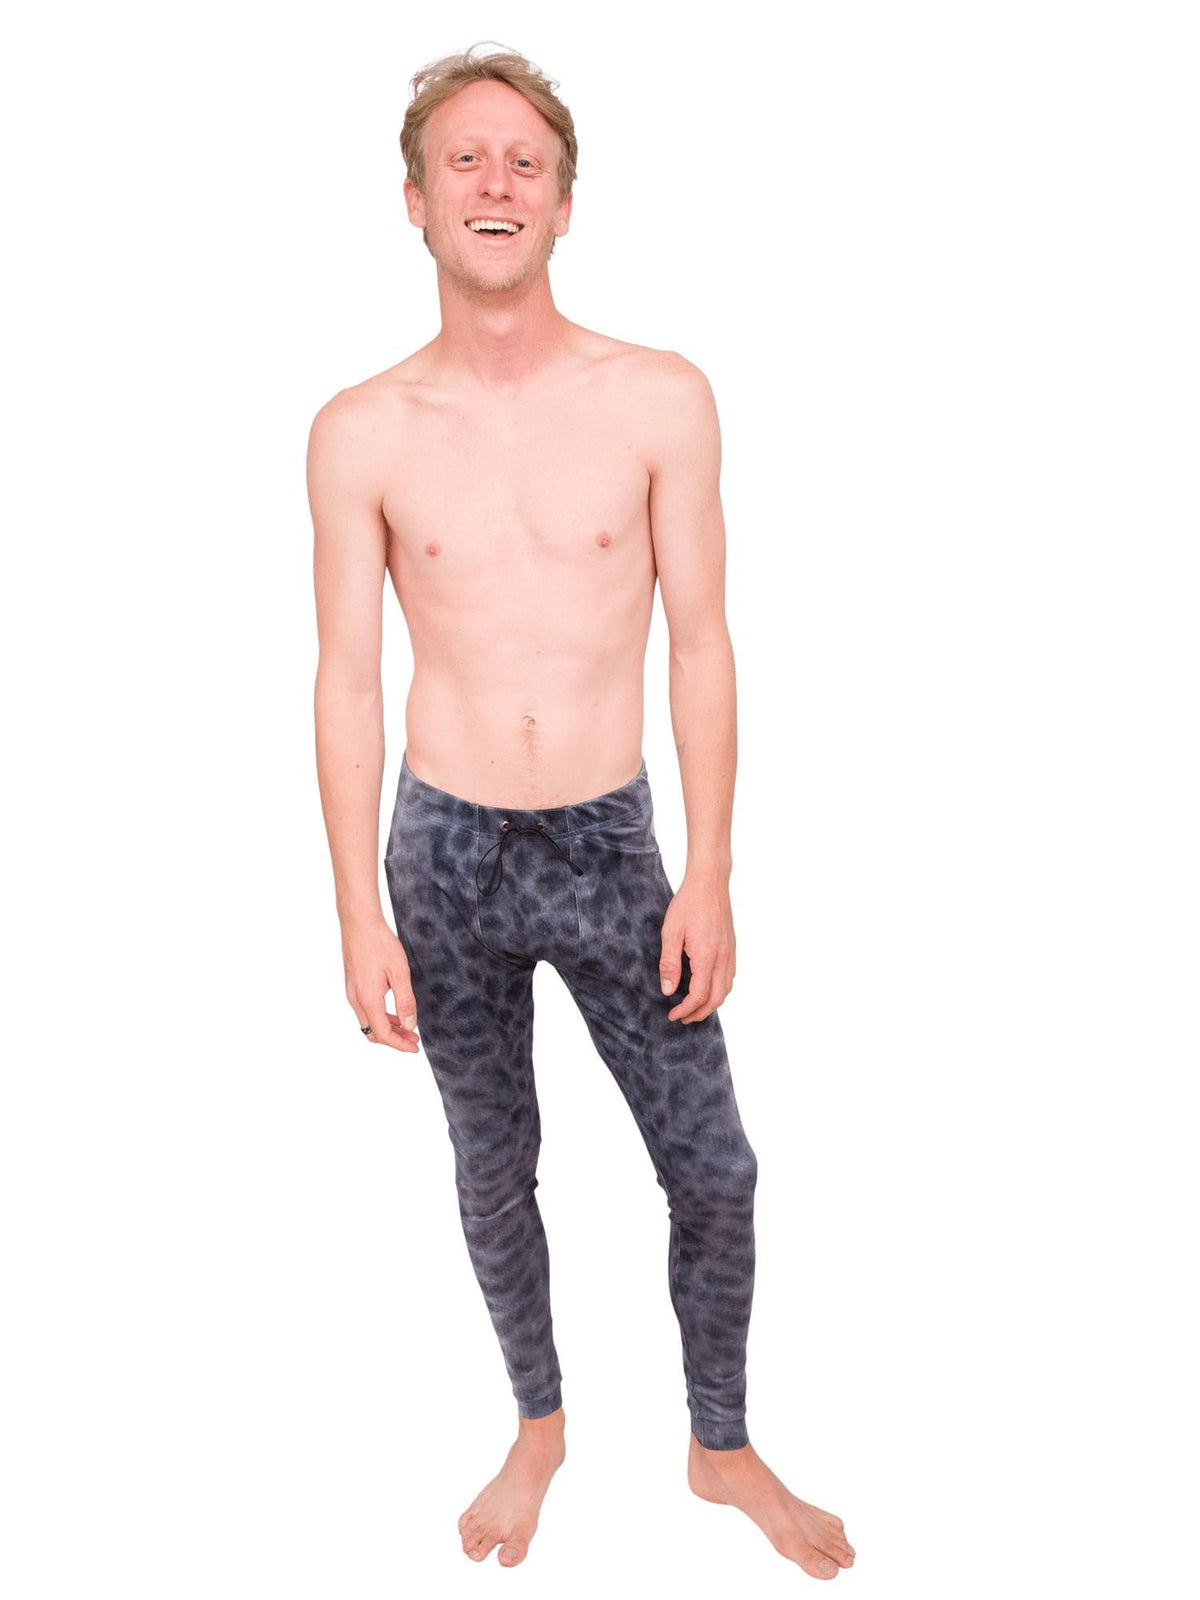 Model: Jake is a shark scientist and educator with Field School. He is 5’10, 135lbs and is wearing a size M legging.